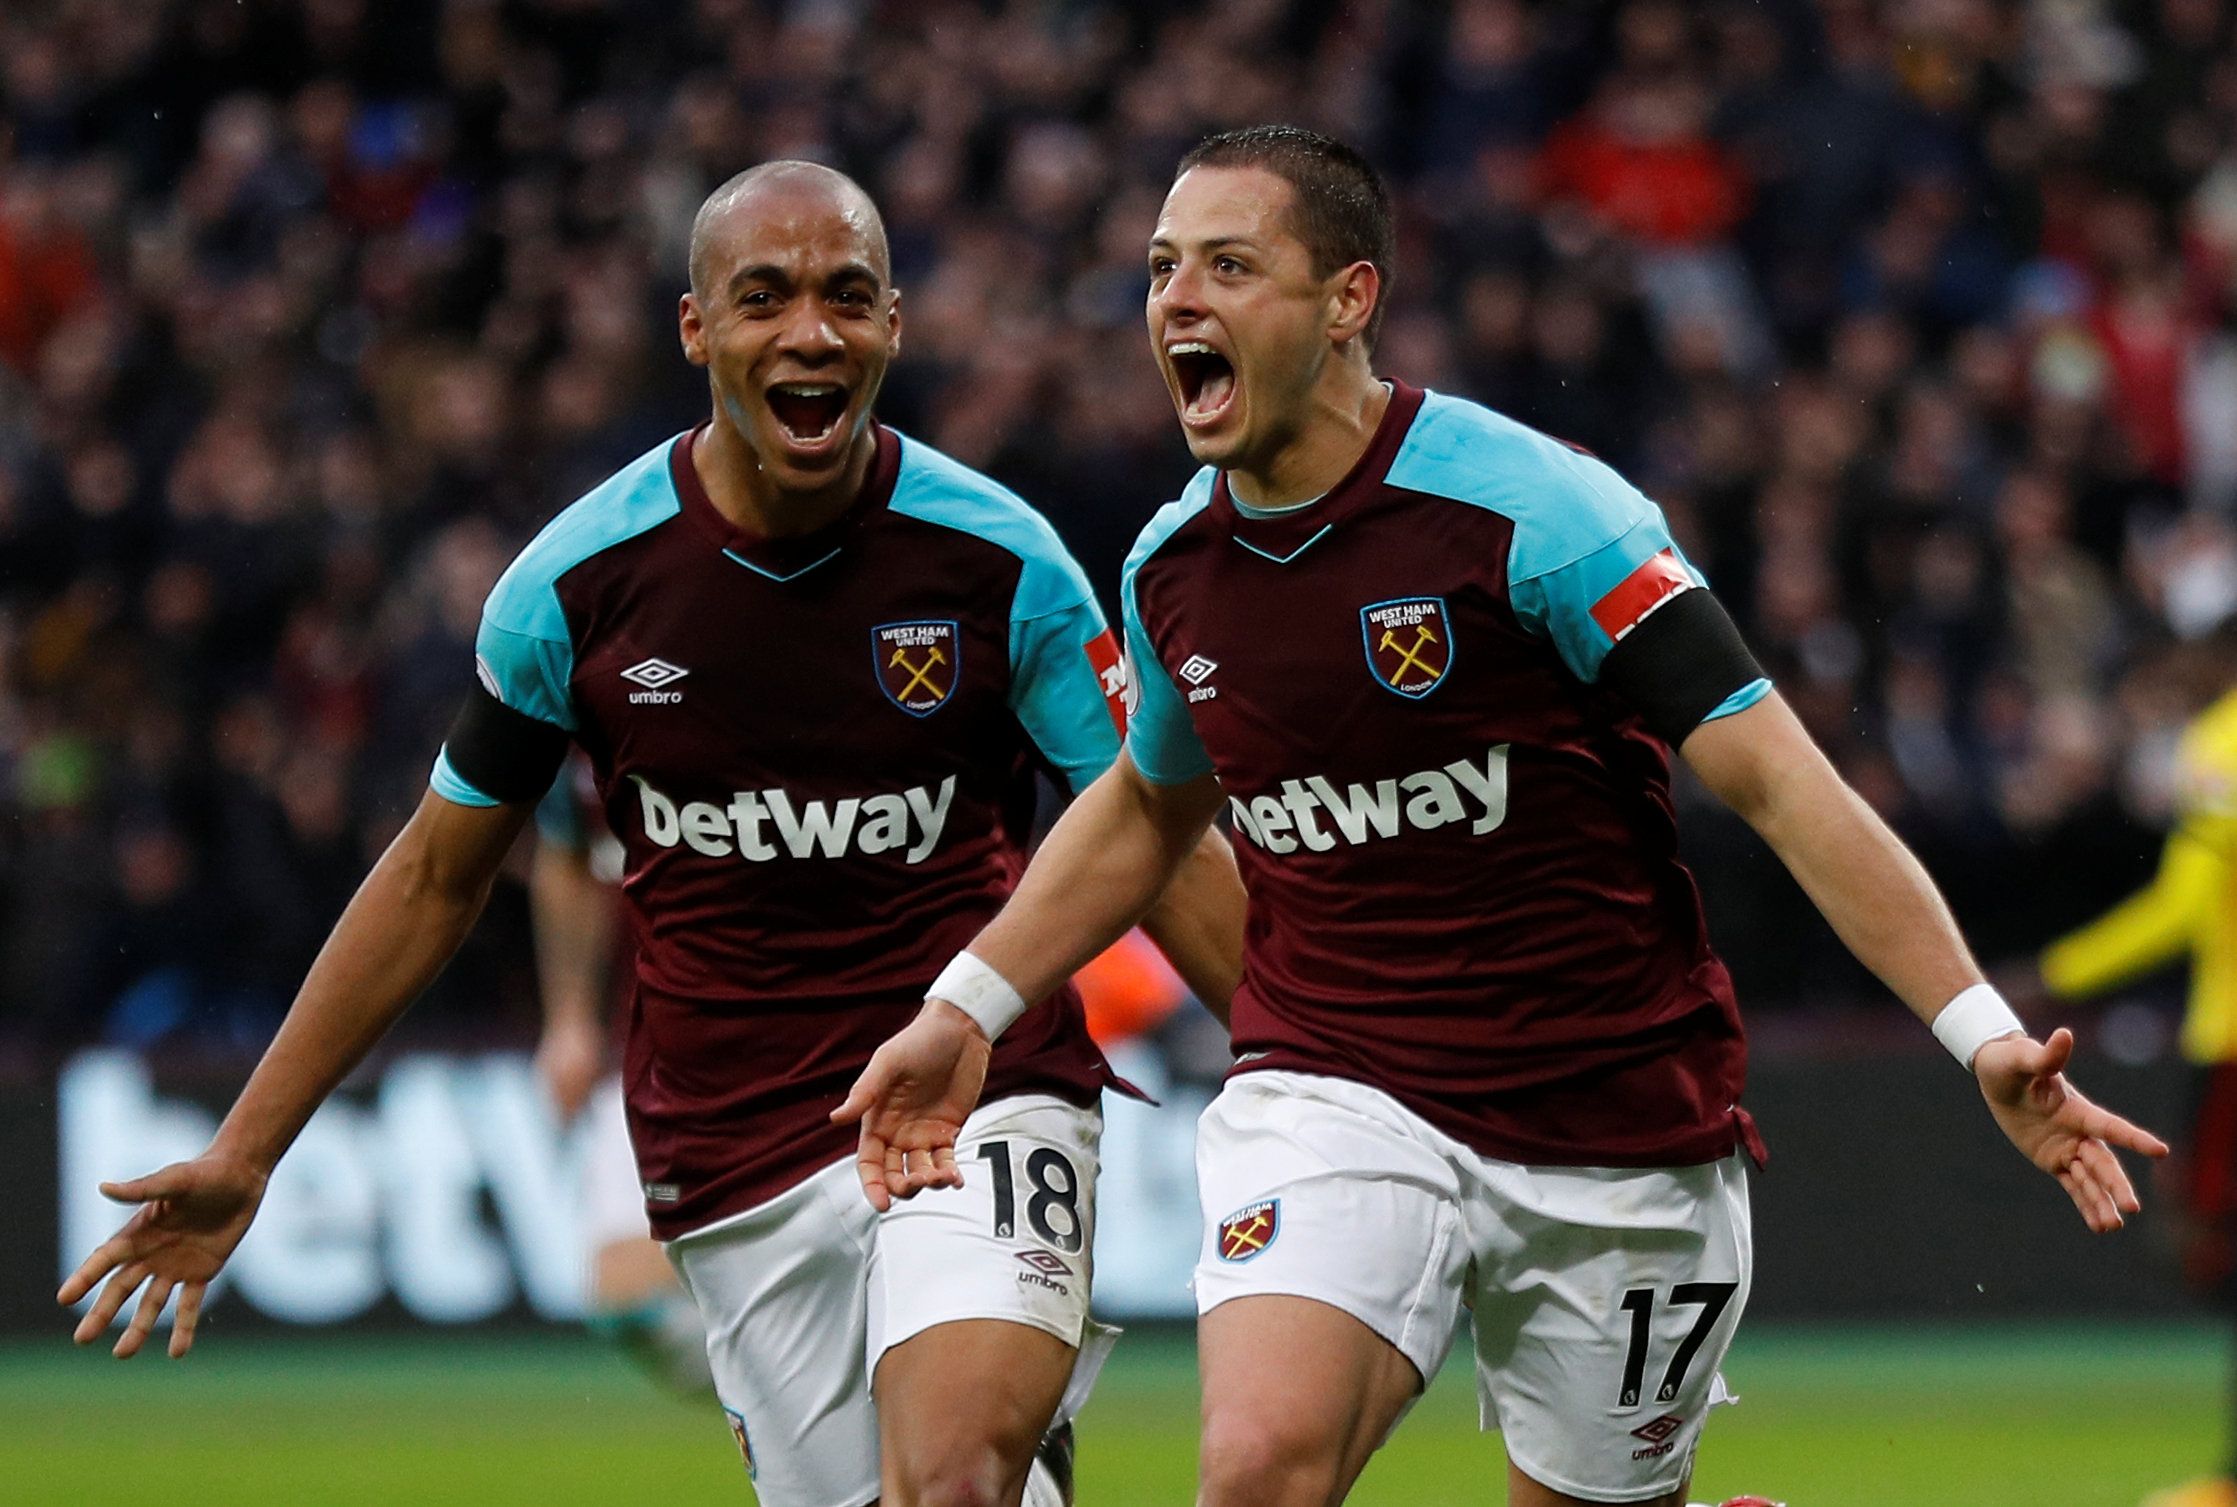 Soccer Football - Premier League - West Ham United vs Watford - London Stadium, London, Britain - February 10, 2018   West Ham United's Javier Hernandez celebrates scoring their first goal with Joao Mario   REUTERS/Peter Nicholls    EDITORIAL USE ONLY. No use with unauthorized audio, video, data, fixture lists, club/league logos or 